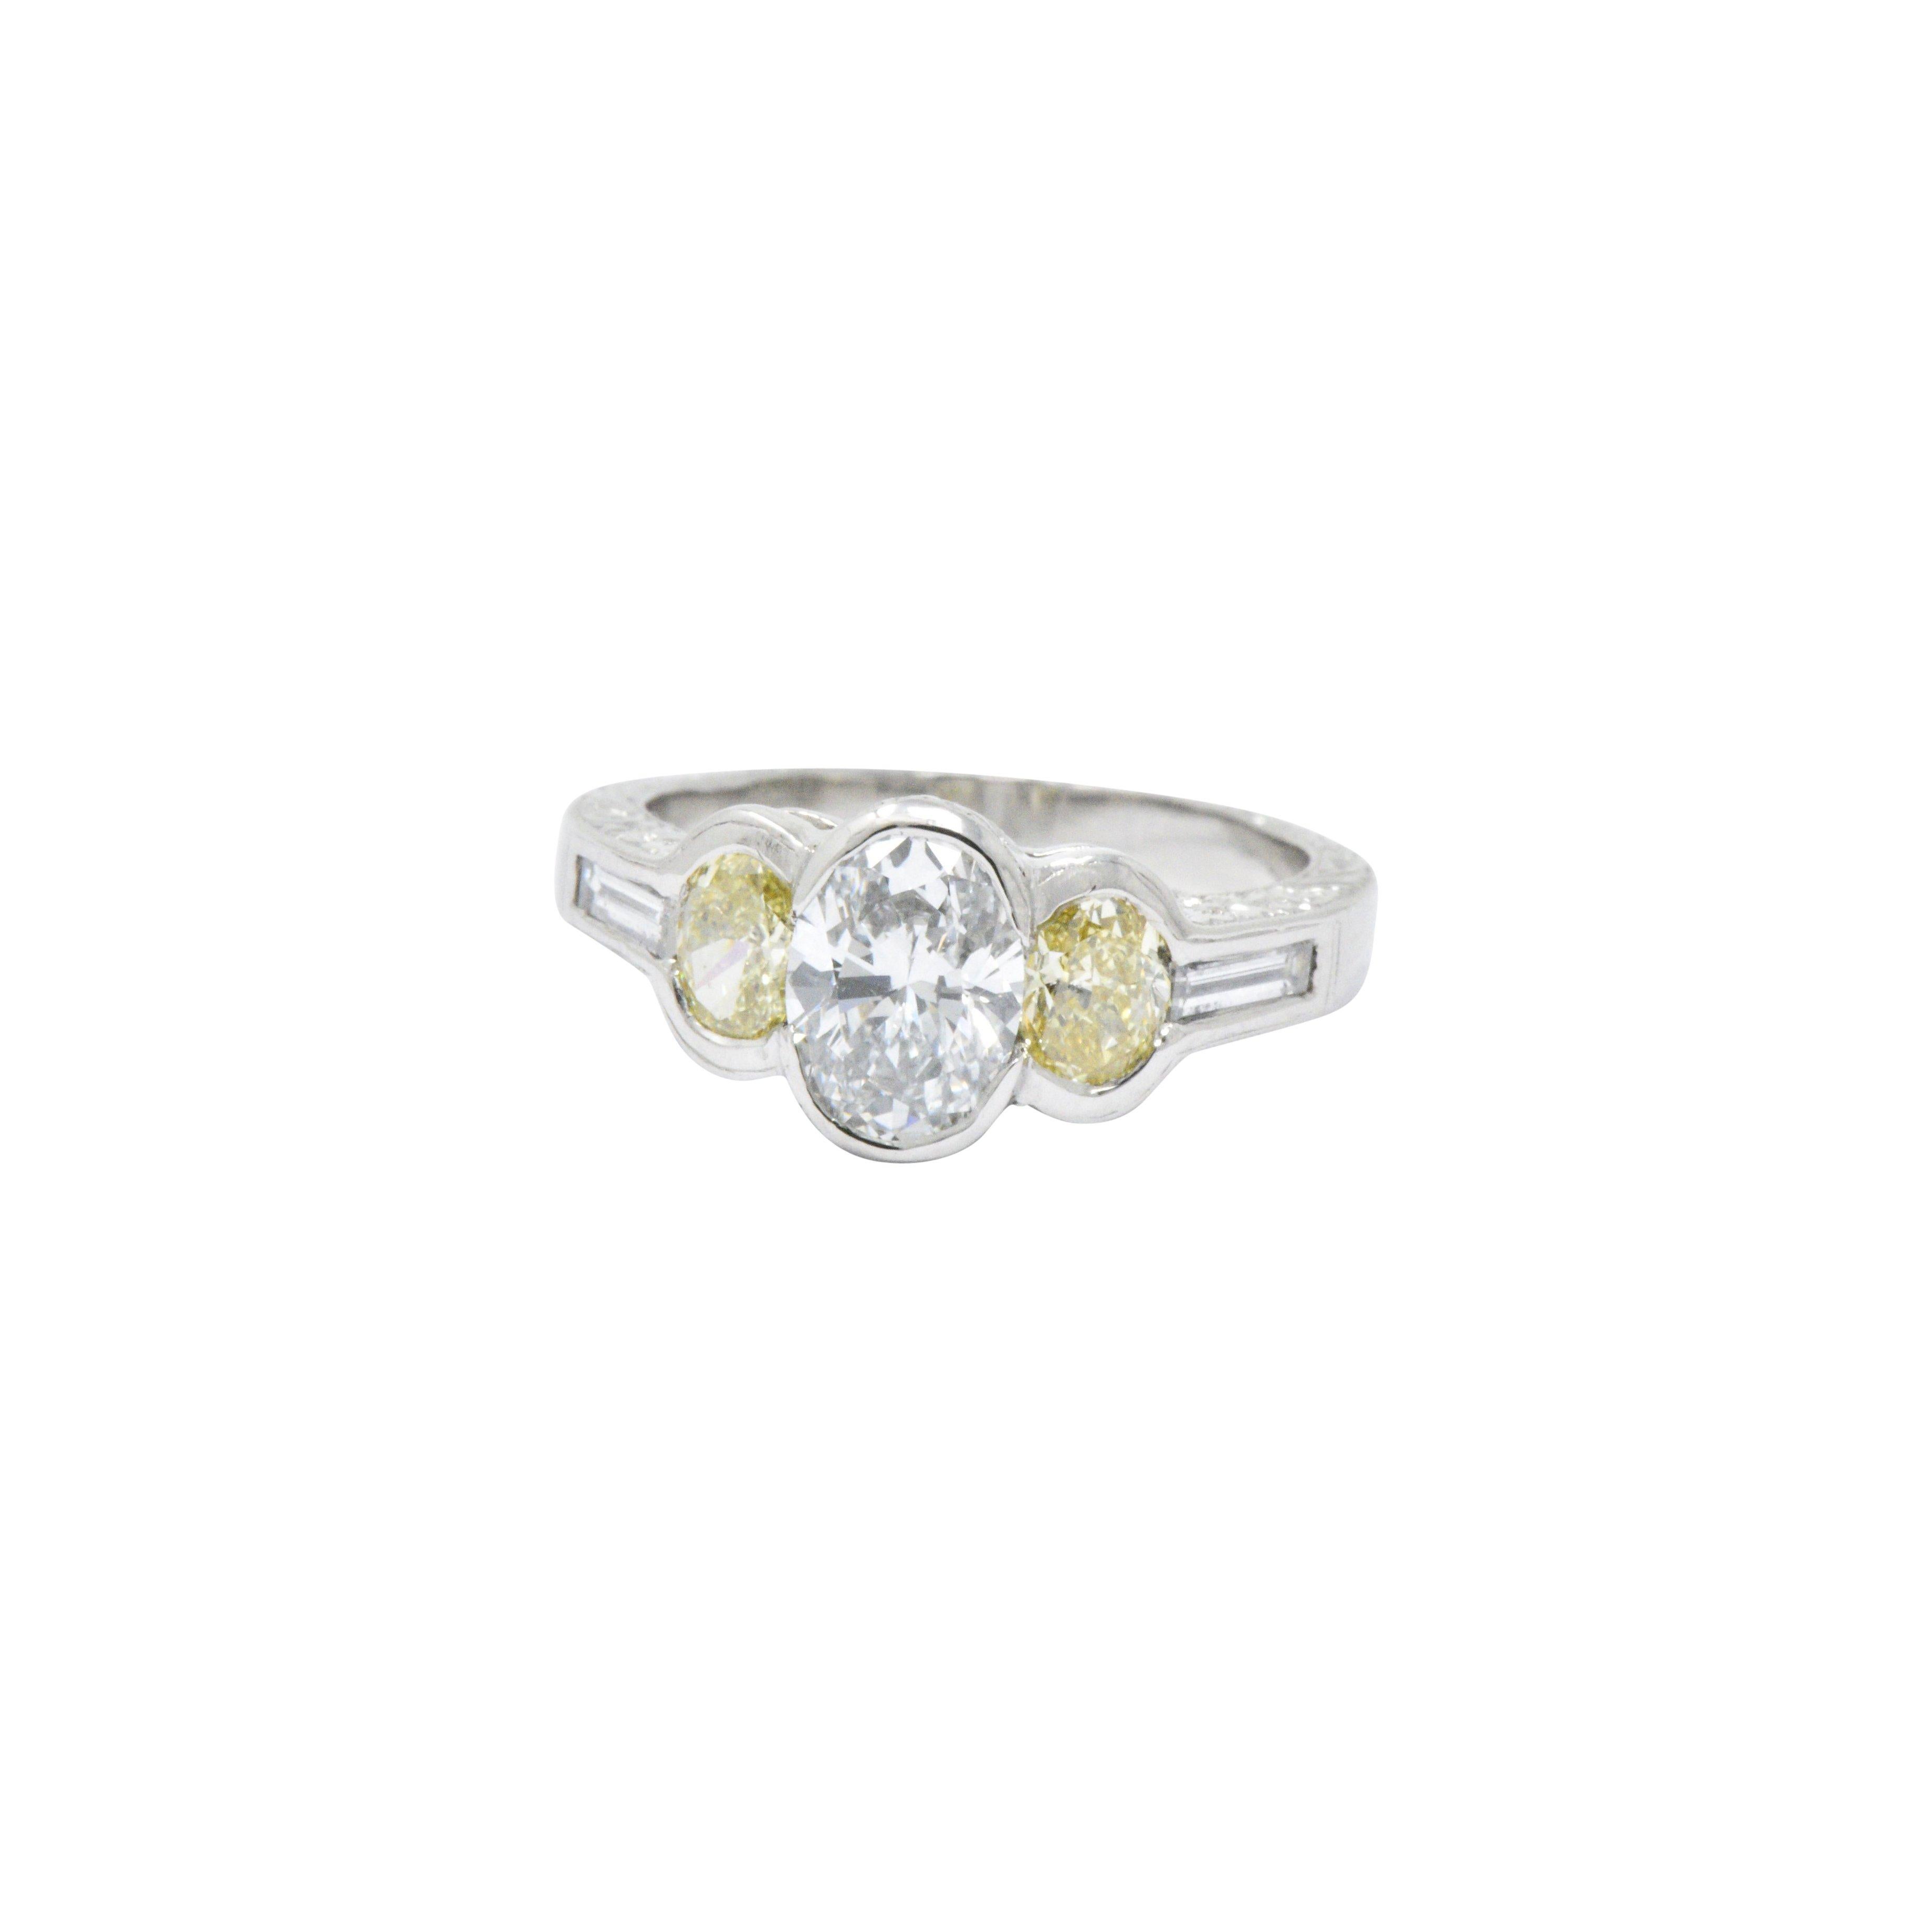 2.03 Carat Total Weight Oval Diamond Fancy Yellow Diamond Platinum Ring In Excellent Condition In Philadelphia, PA